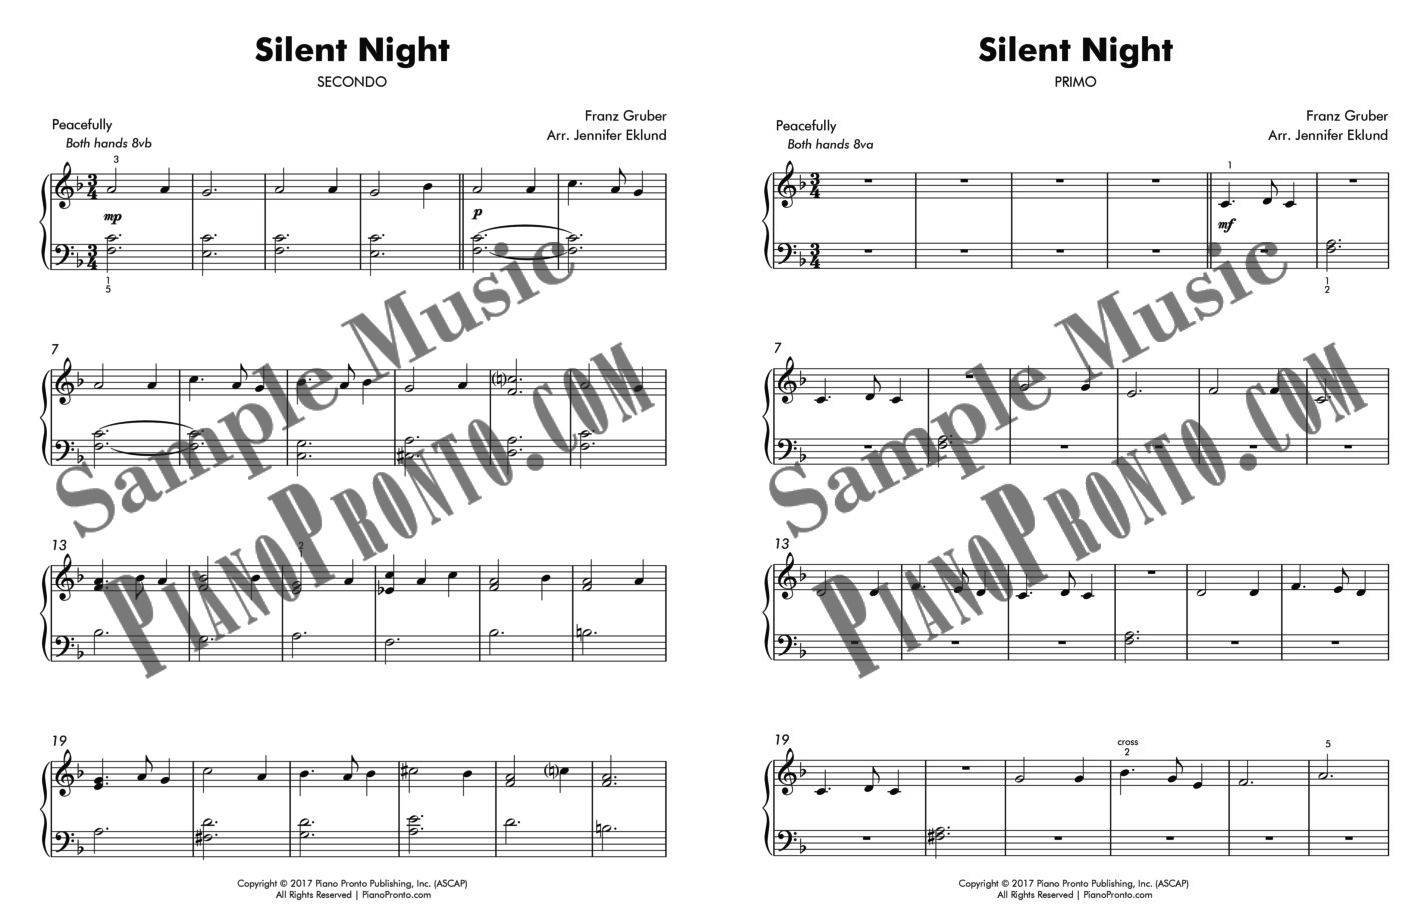 Silent Night Piano Sheet Music For Beginners / SILENT NIGHT Piano Sheet music - Guitar chords | Easy Sheet Music : Download free silent night sheet music now!